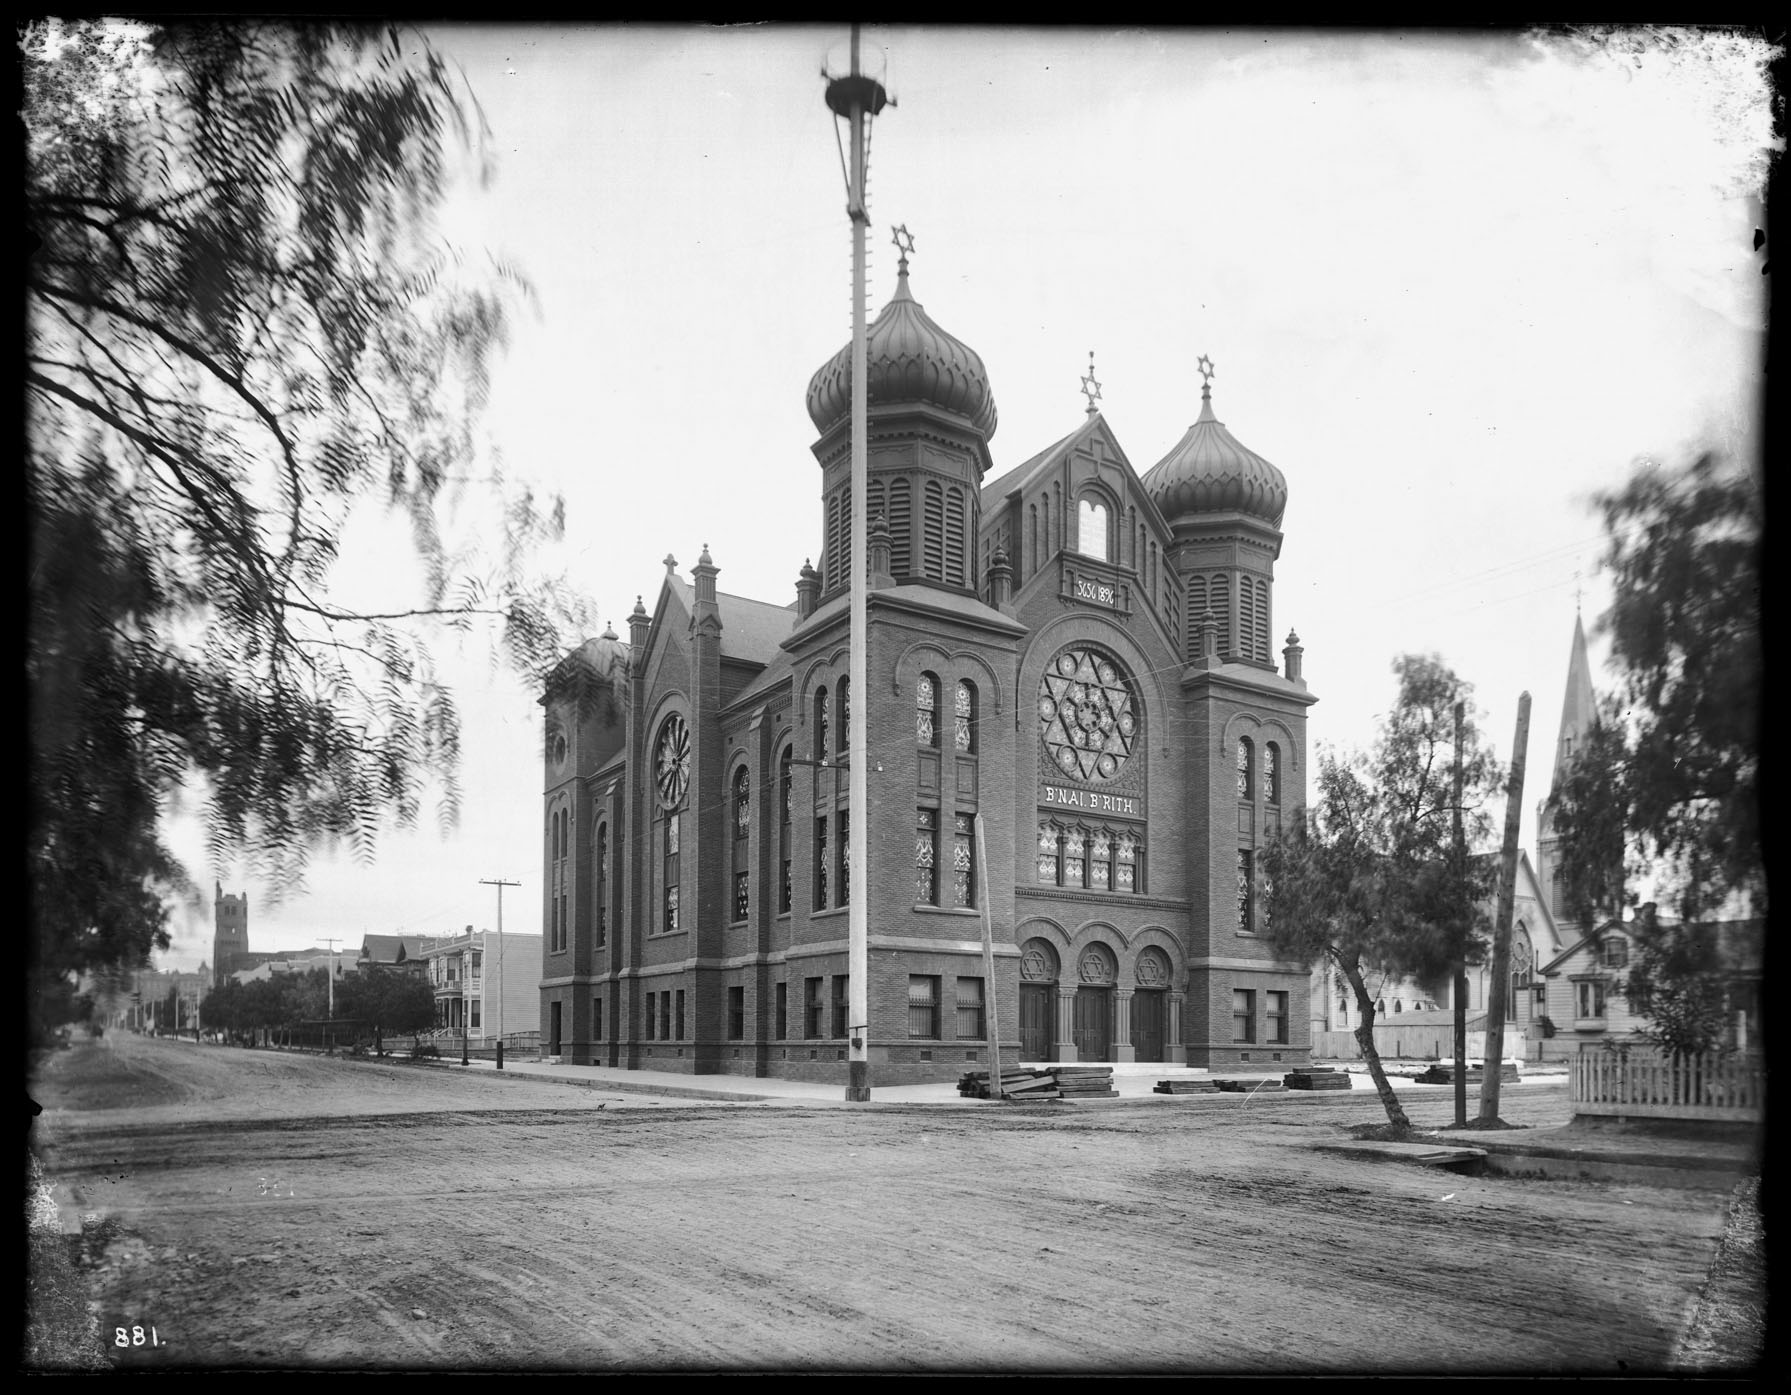 Exterior view of the B'nai B'rith Temple on Hope Street and Ninth Street in Los Angeles, ca.1902, CH Collection/Alamy Stock Photo.
